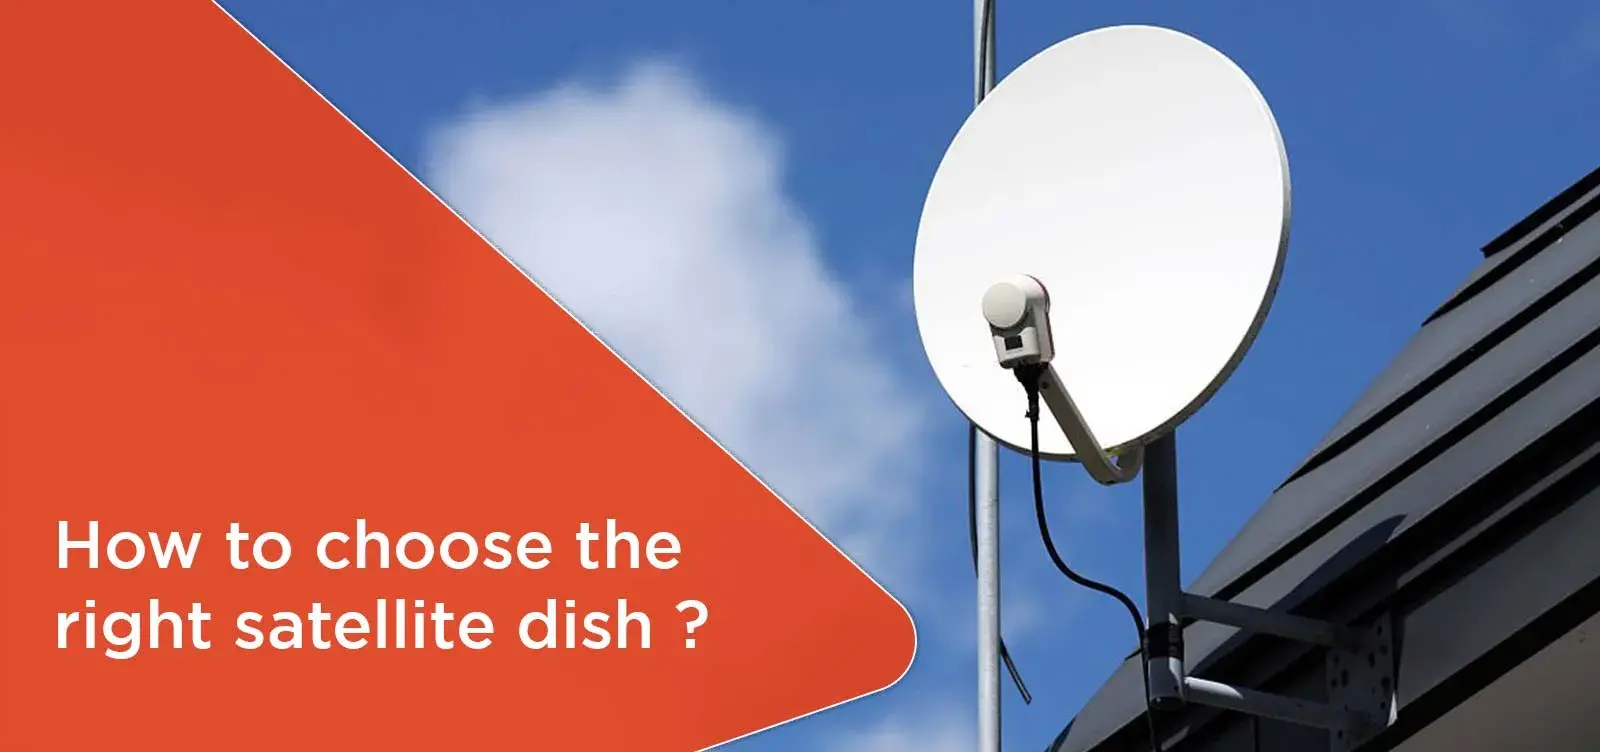 How to choose the right satellite dish?